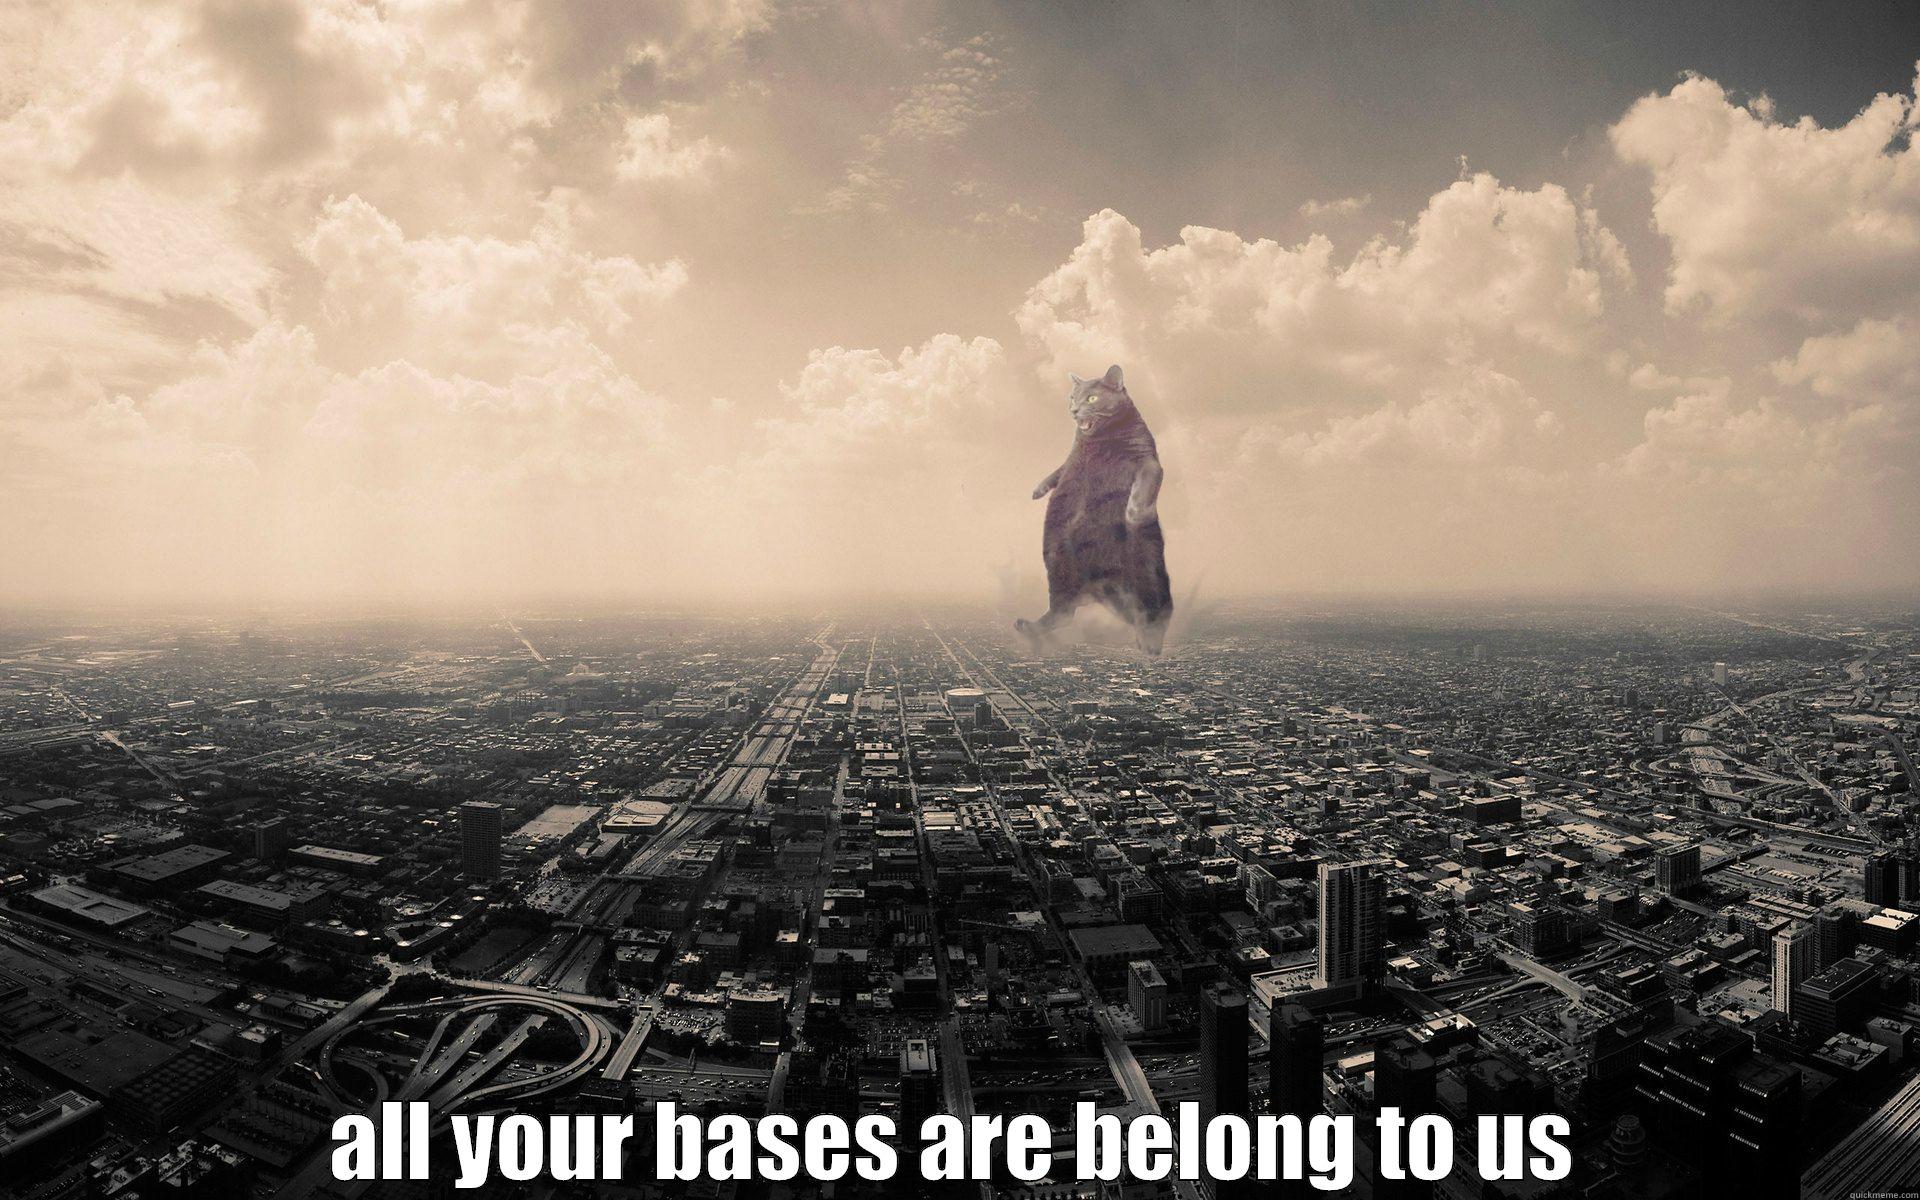  ALL YOUR BASES ARE BELONG TO US 